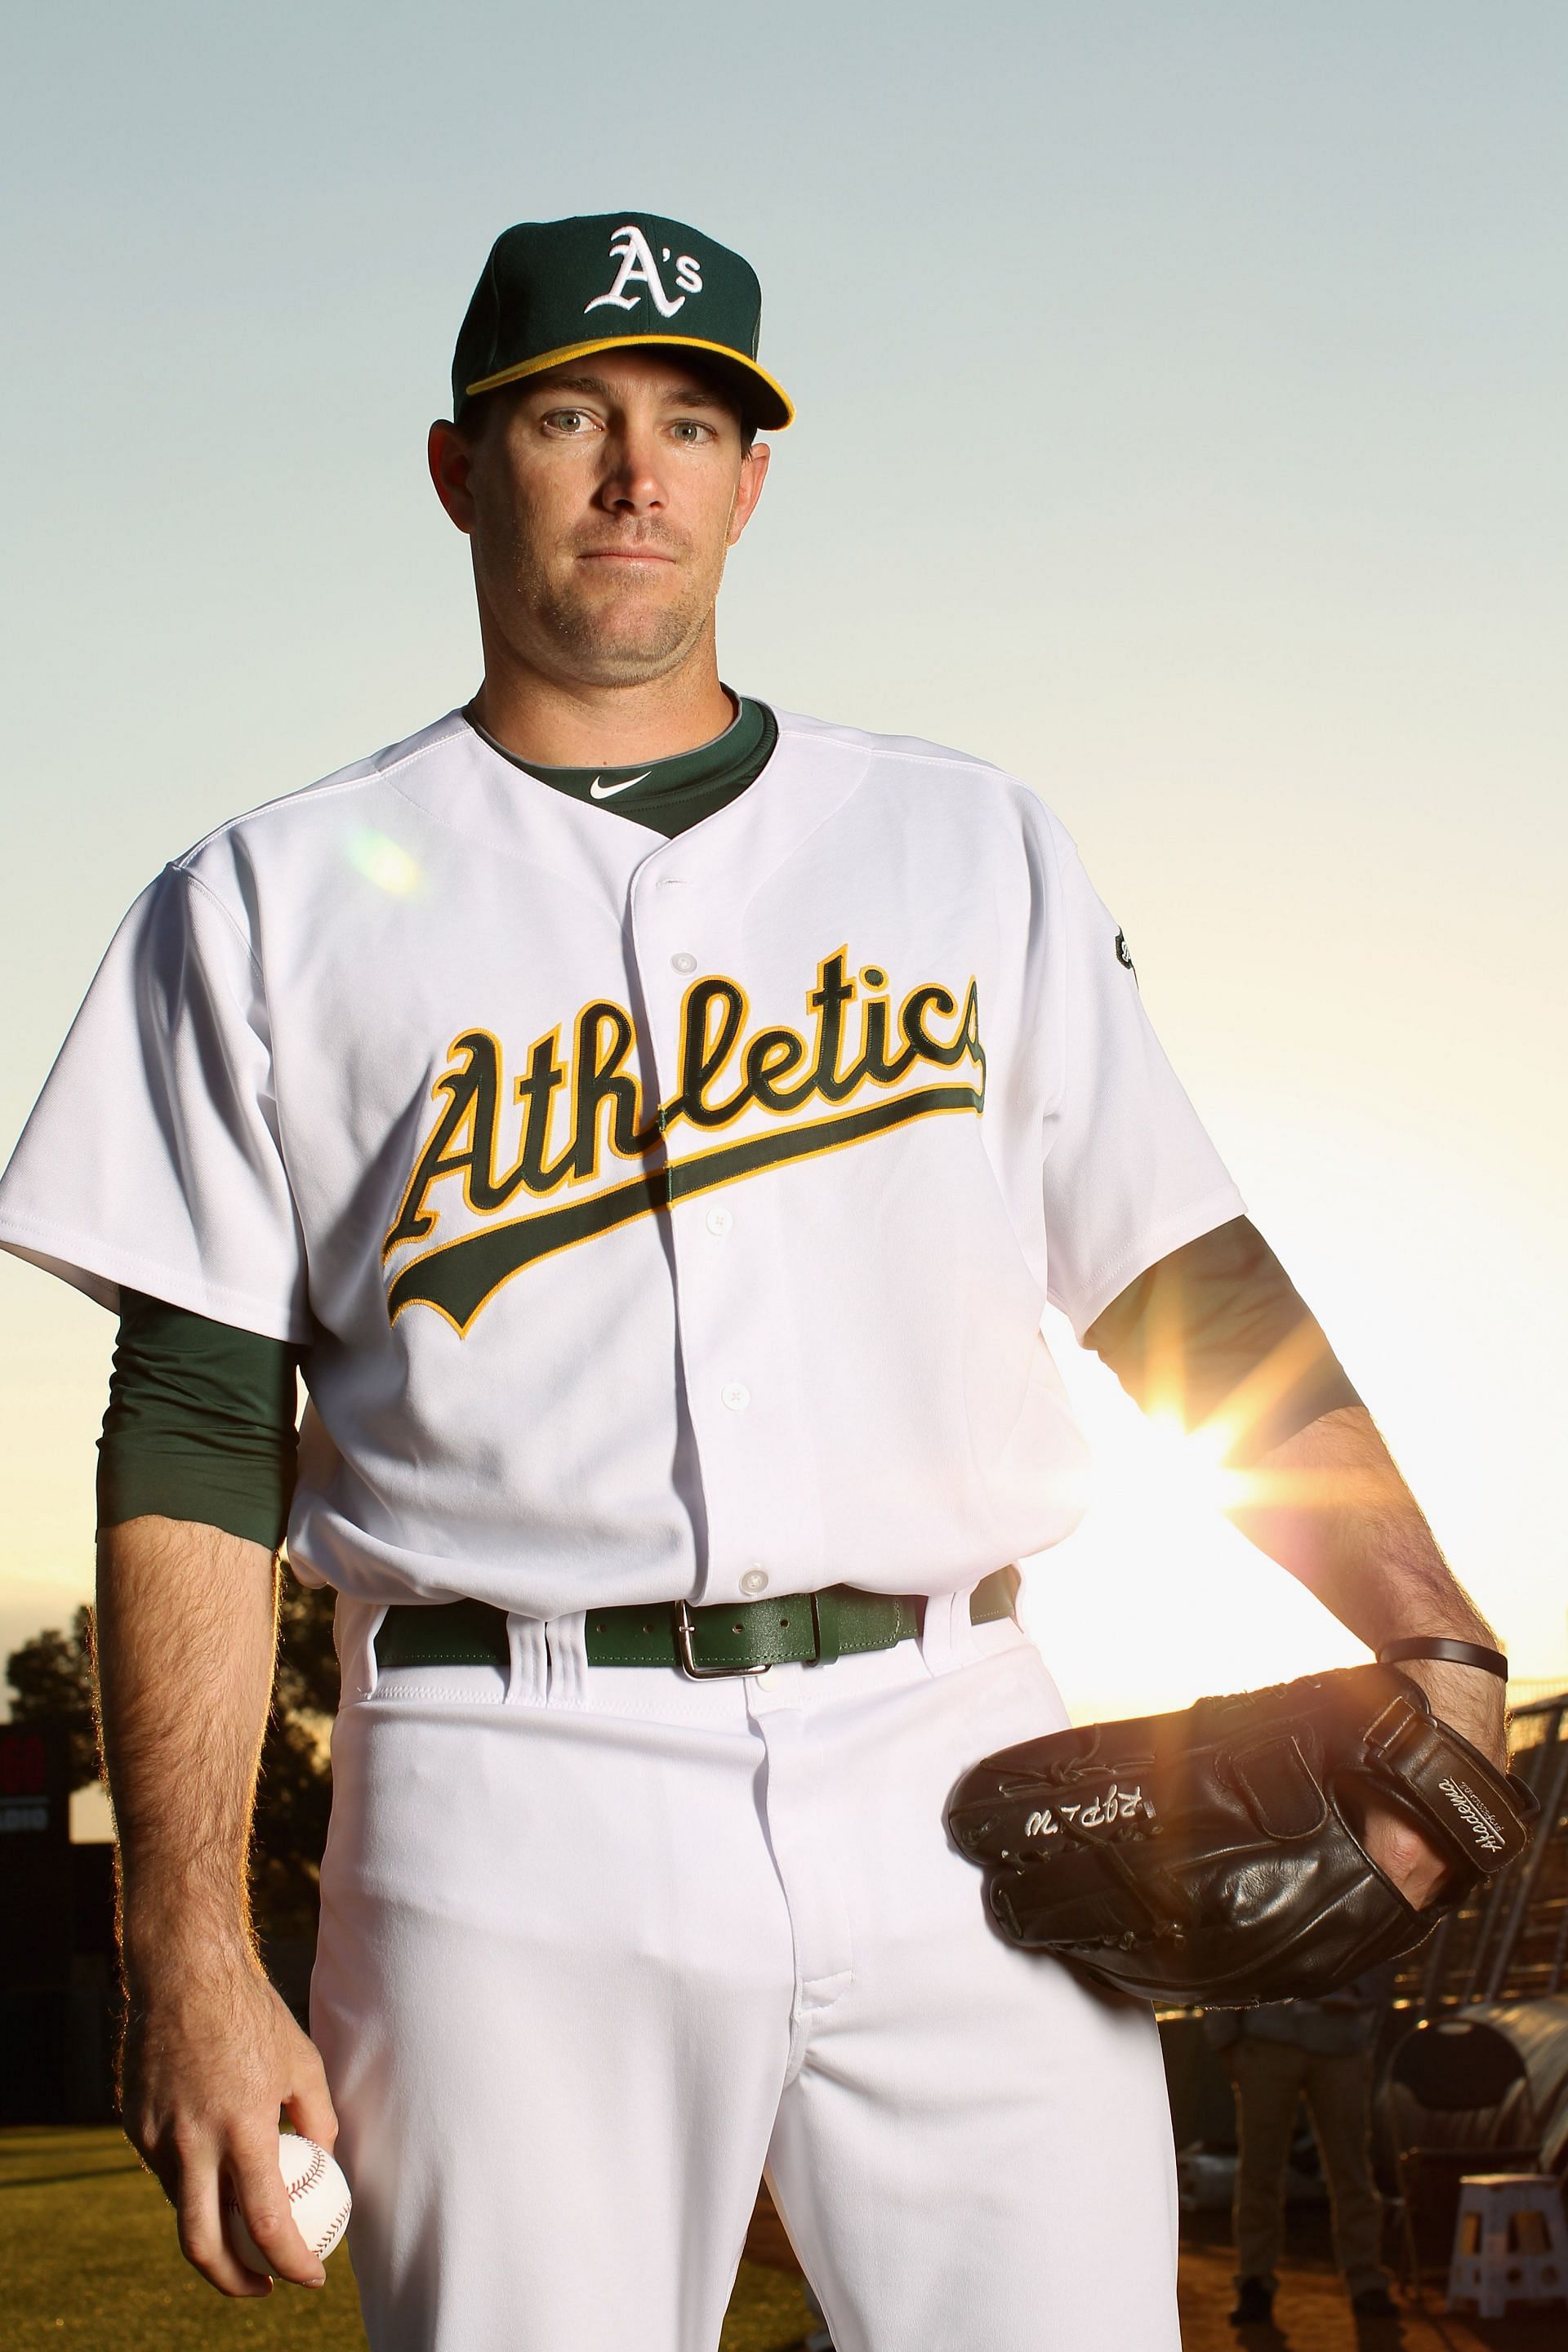 Willie Eyre #45 of the Oakland Athletics poses for a portrait during media photo day at Phoenix Municipal Stadium on February 24, 2011 in Phoenix, Arizona. (Photo by Ezra Shaw/Getty Images)